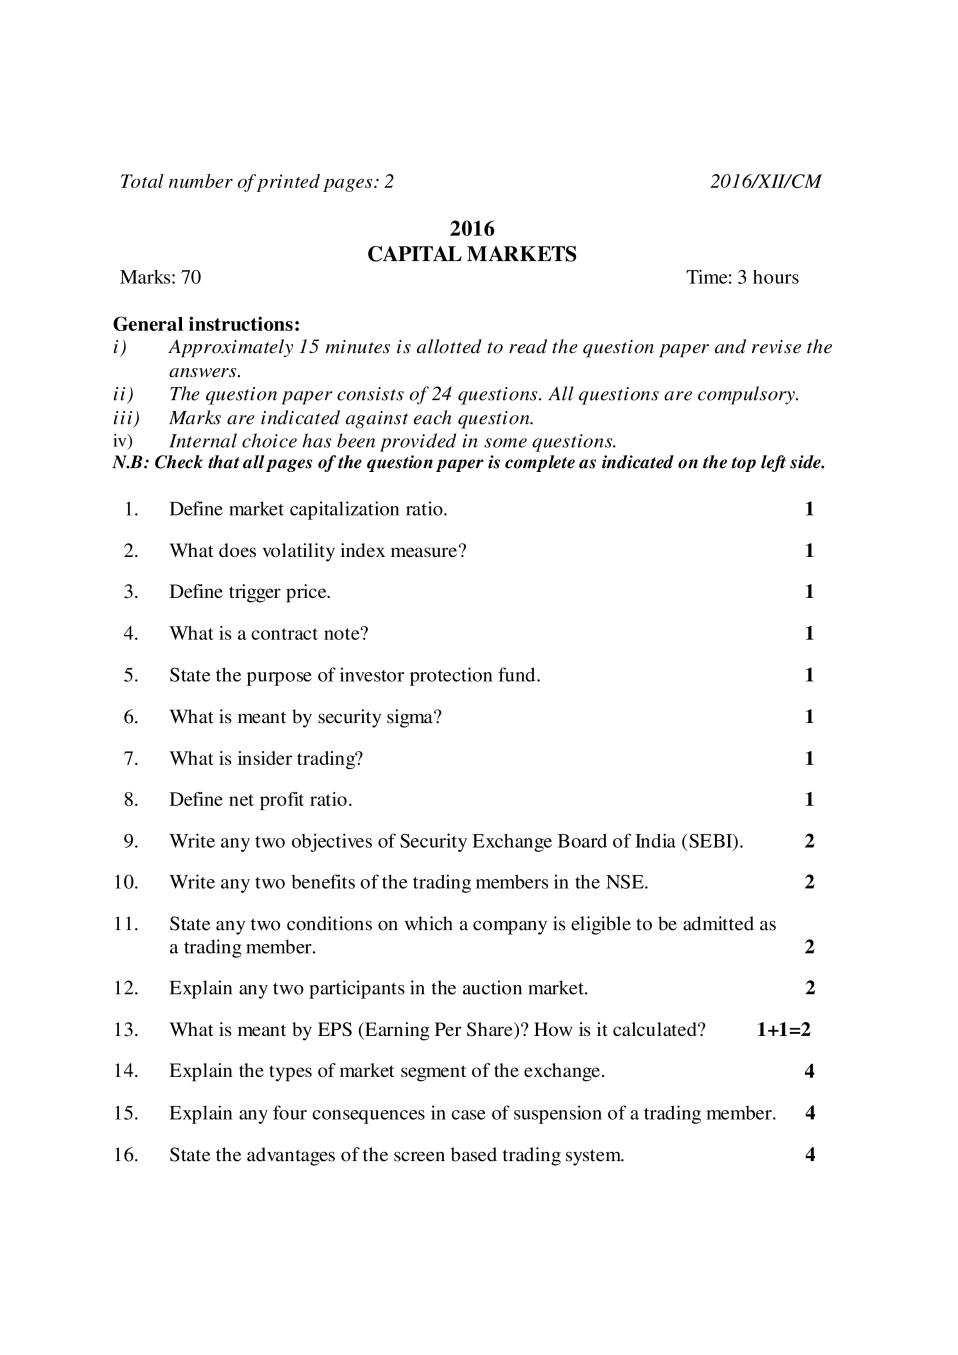 NBSE Class 12 Question Paper 2016 for Capital Markets - Page 1